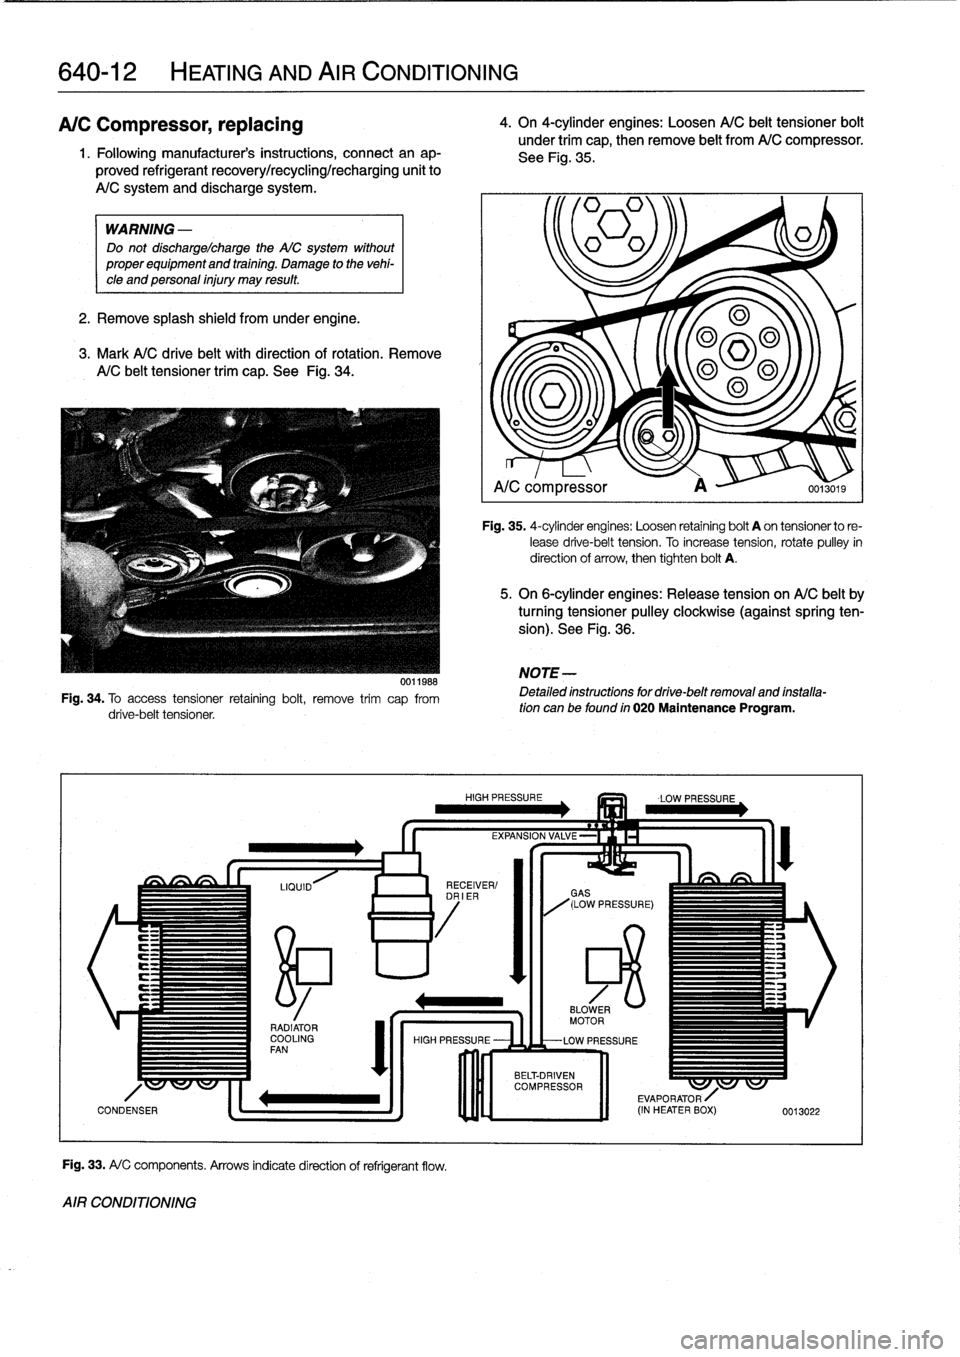 BMW 318i 1998 E36 Service Manual 
640-12

	

HEATING
AND
AIR
CONDITIONING

A/C
Compressor,
replacing

1
.
Followingmanufacturers
instructions,
connectanap-

proved
refrigerant
recovery/recycling/recharging
unit
to

A/C
system
and
di